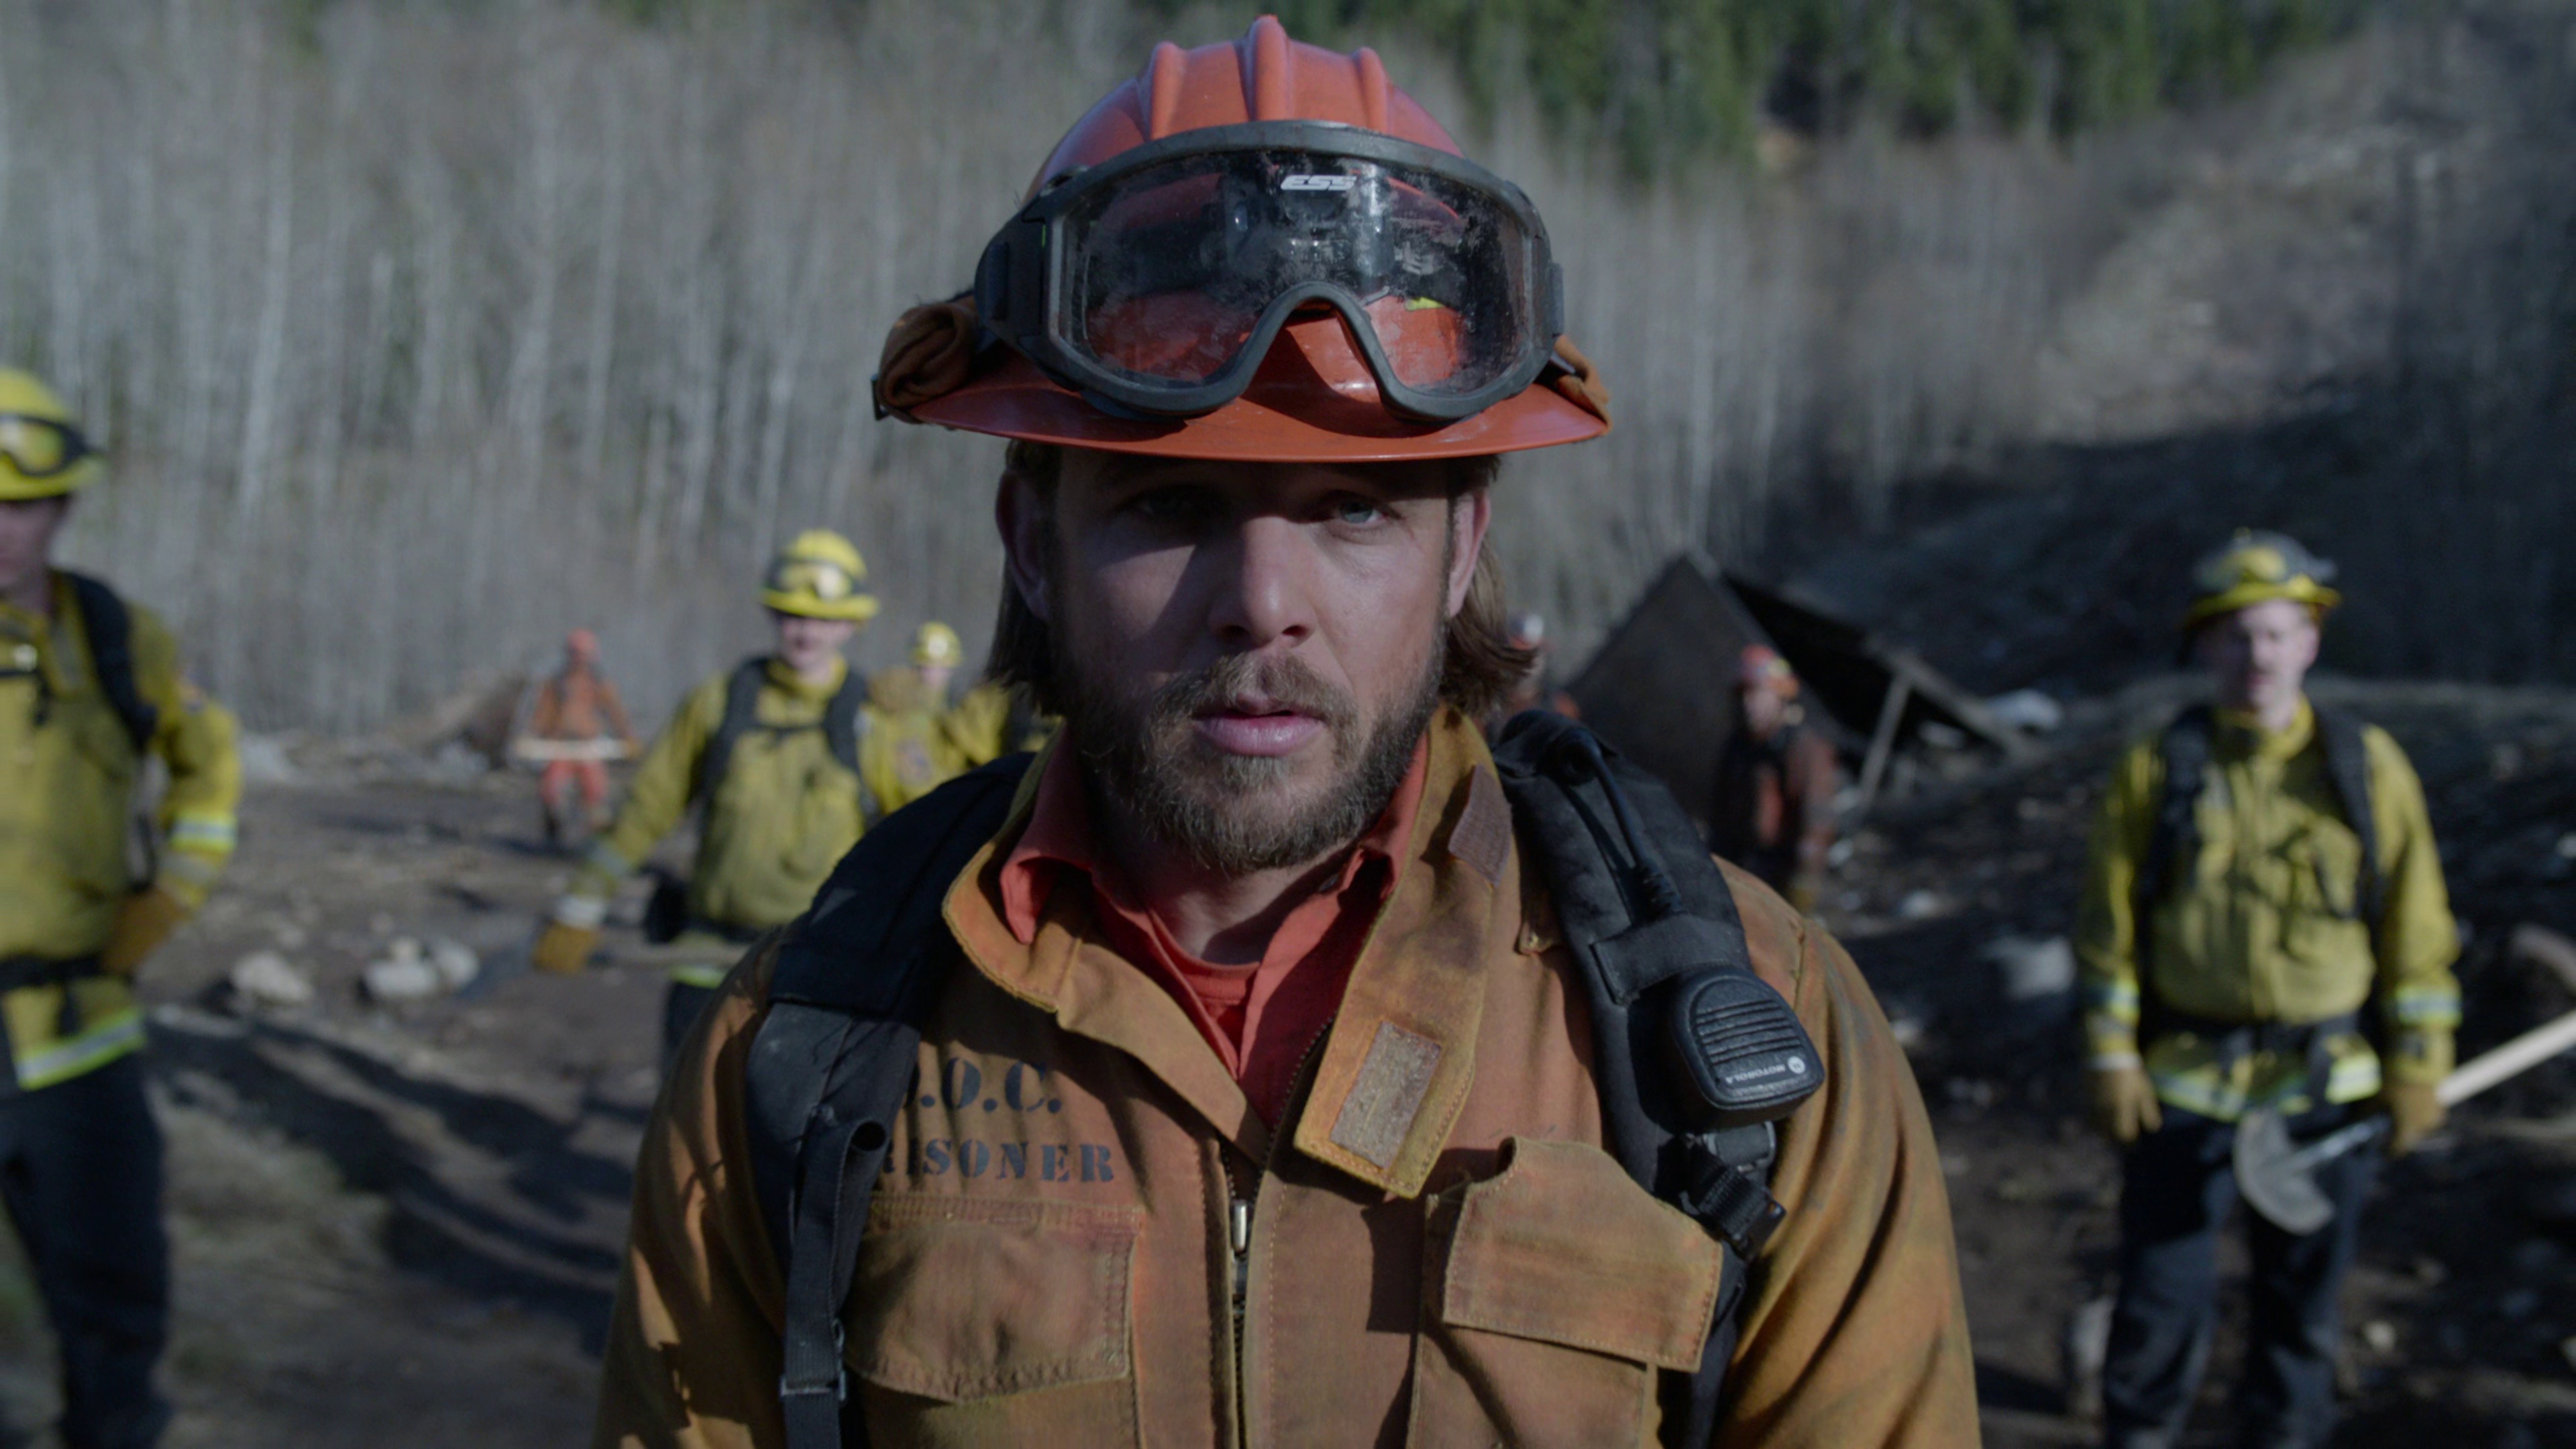 Ess Eye Pro Goggles And Motorola Radio In Fire Country S01E22 